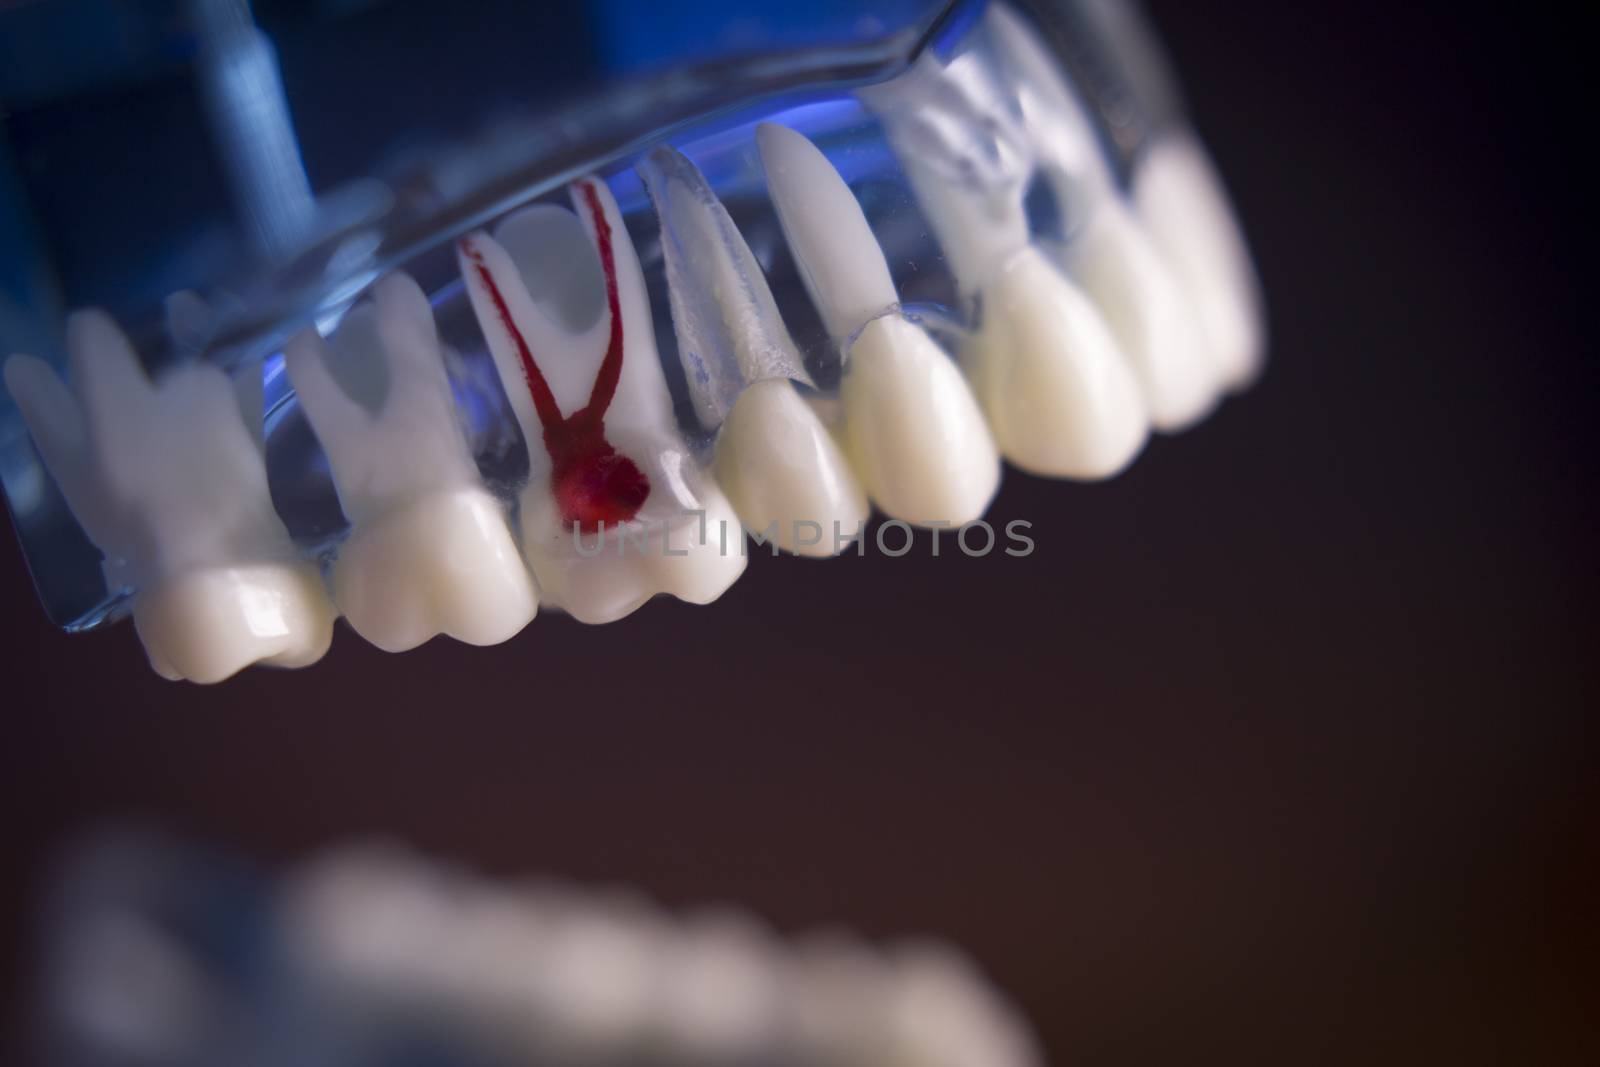 Denture for dentistry students by GemaIbarra